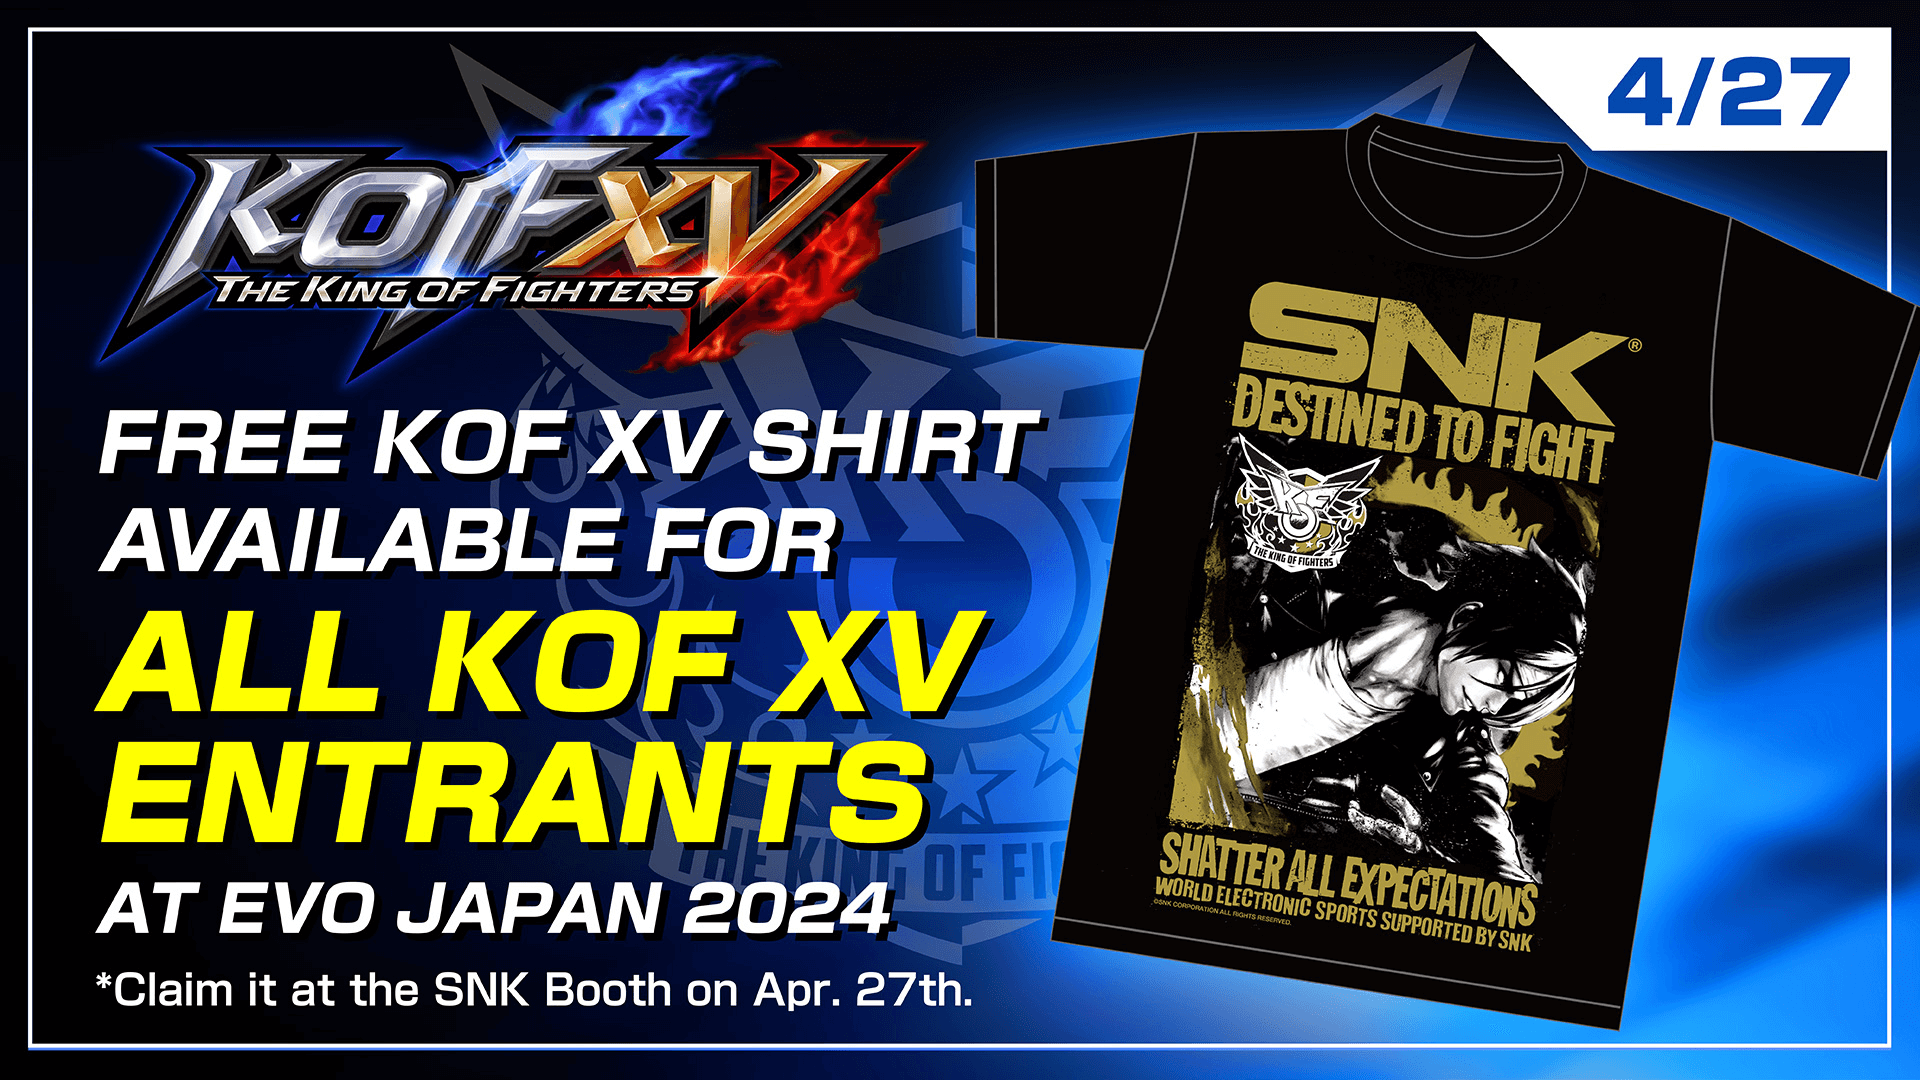 KOF XV Competitors at Evo Japan 2024 Can Receive a Free Shirt